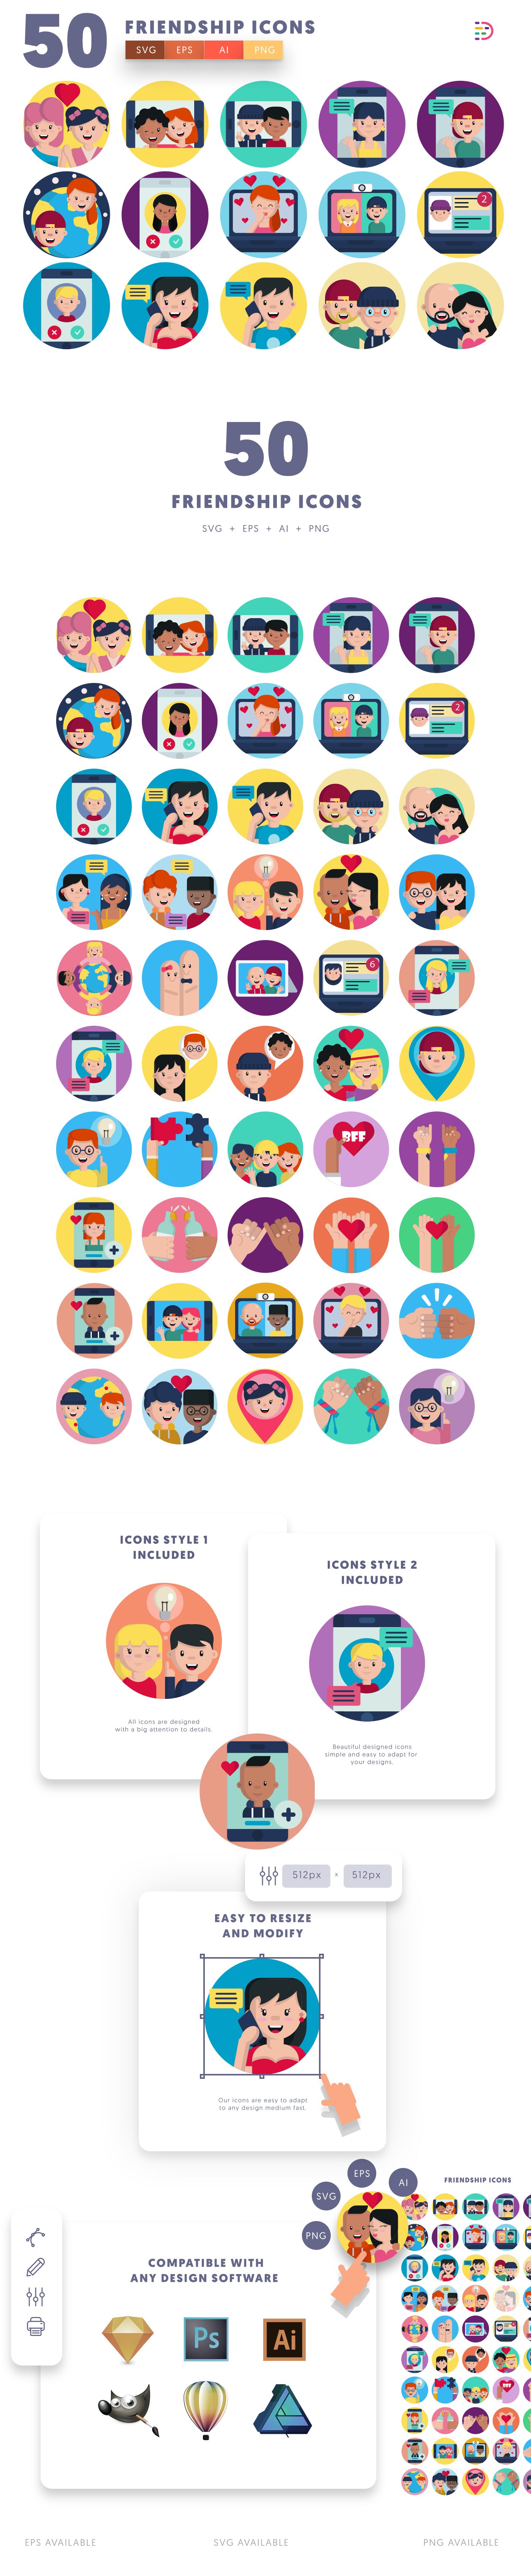 Editable friendship icons icon pack, easy to edit and customize icons